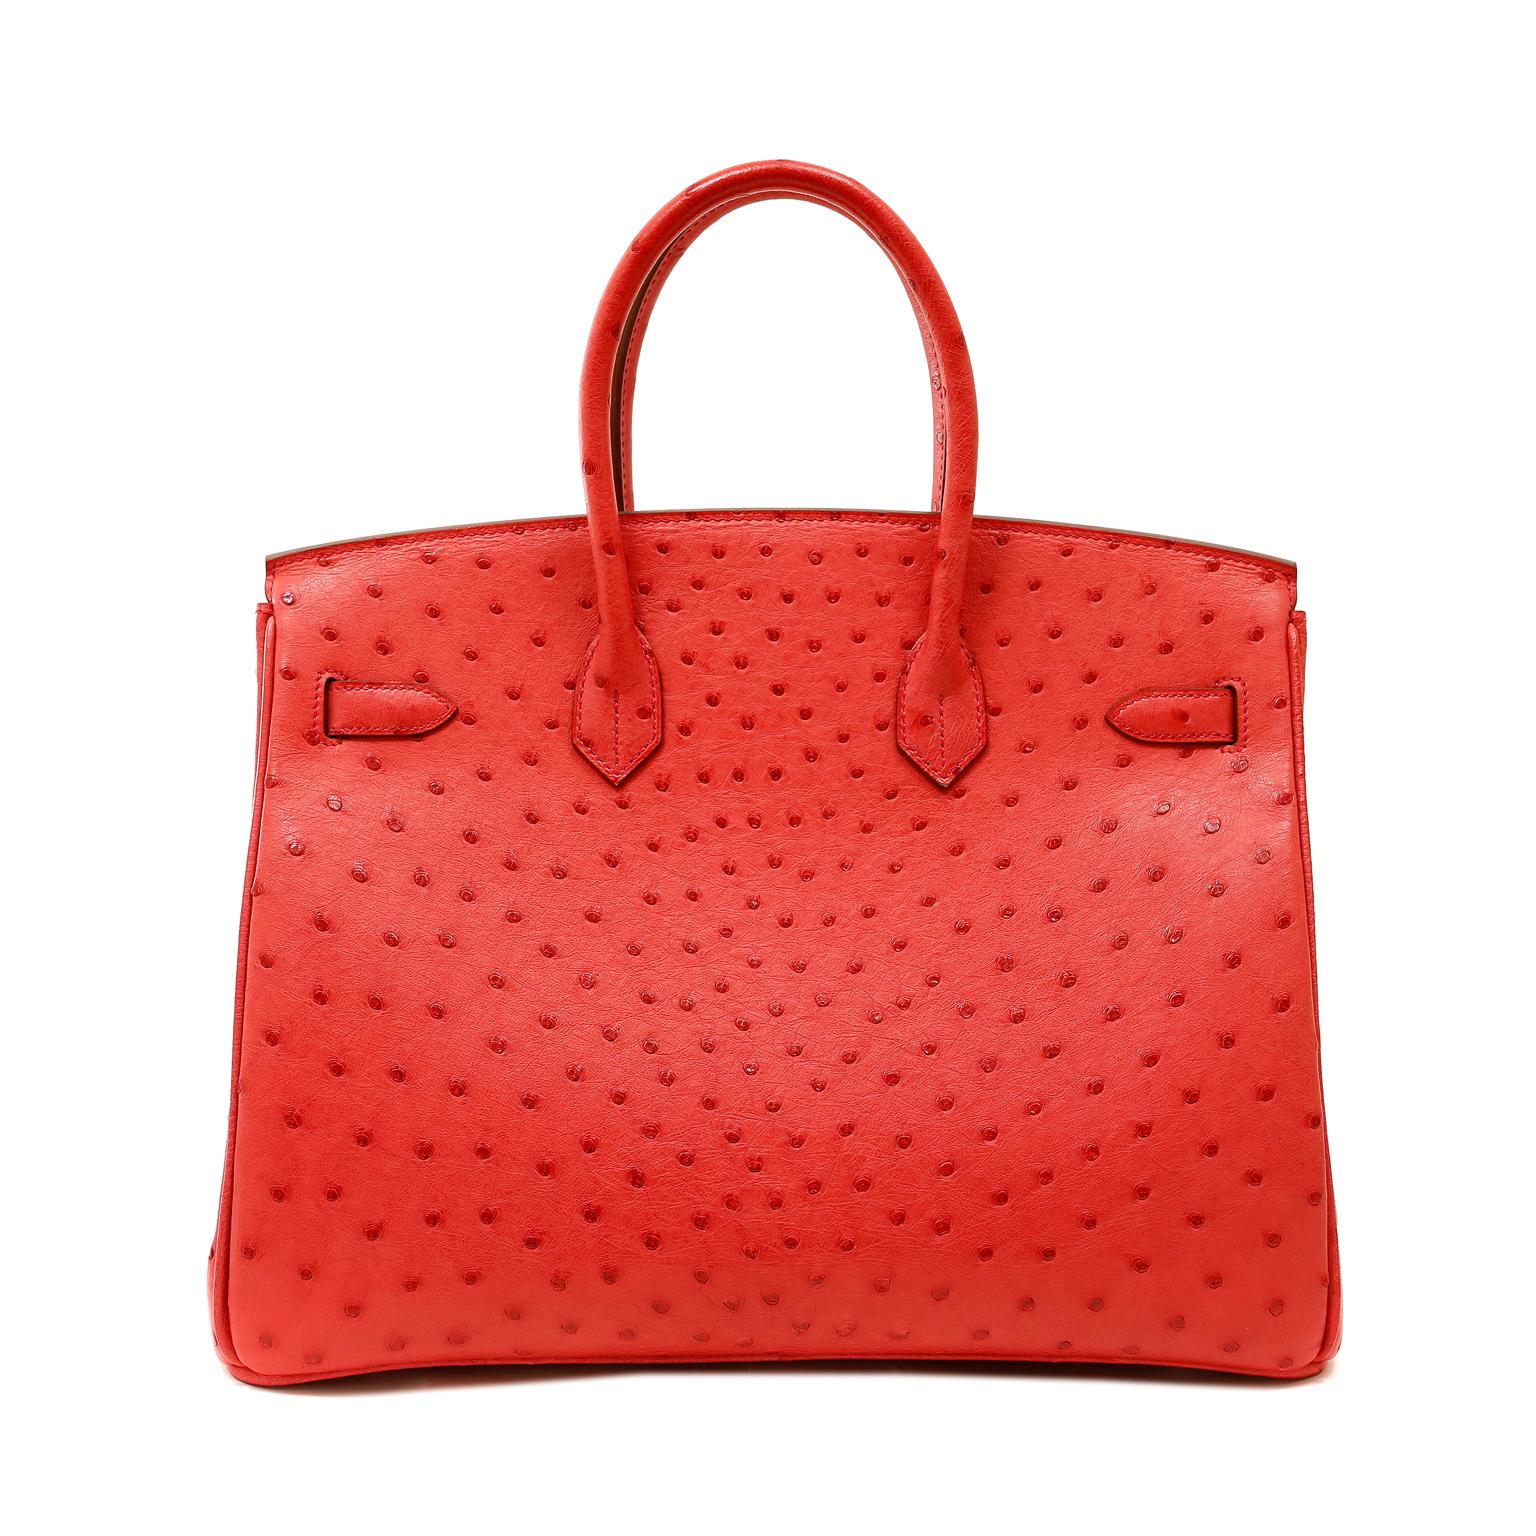 This authentic Hermès Bougainvillea Ostrich 35cm Birkin is in pristine unworn condition with the protective plastic intact on the hardware. Hermès bags are considered the ultimate luxury item the world over.  Hand stitched by skilled craftsmen, wait